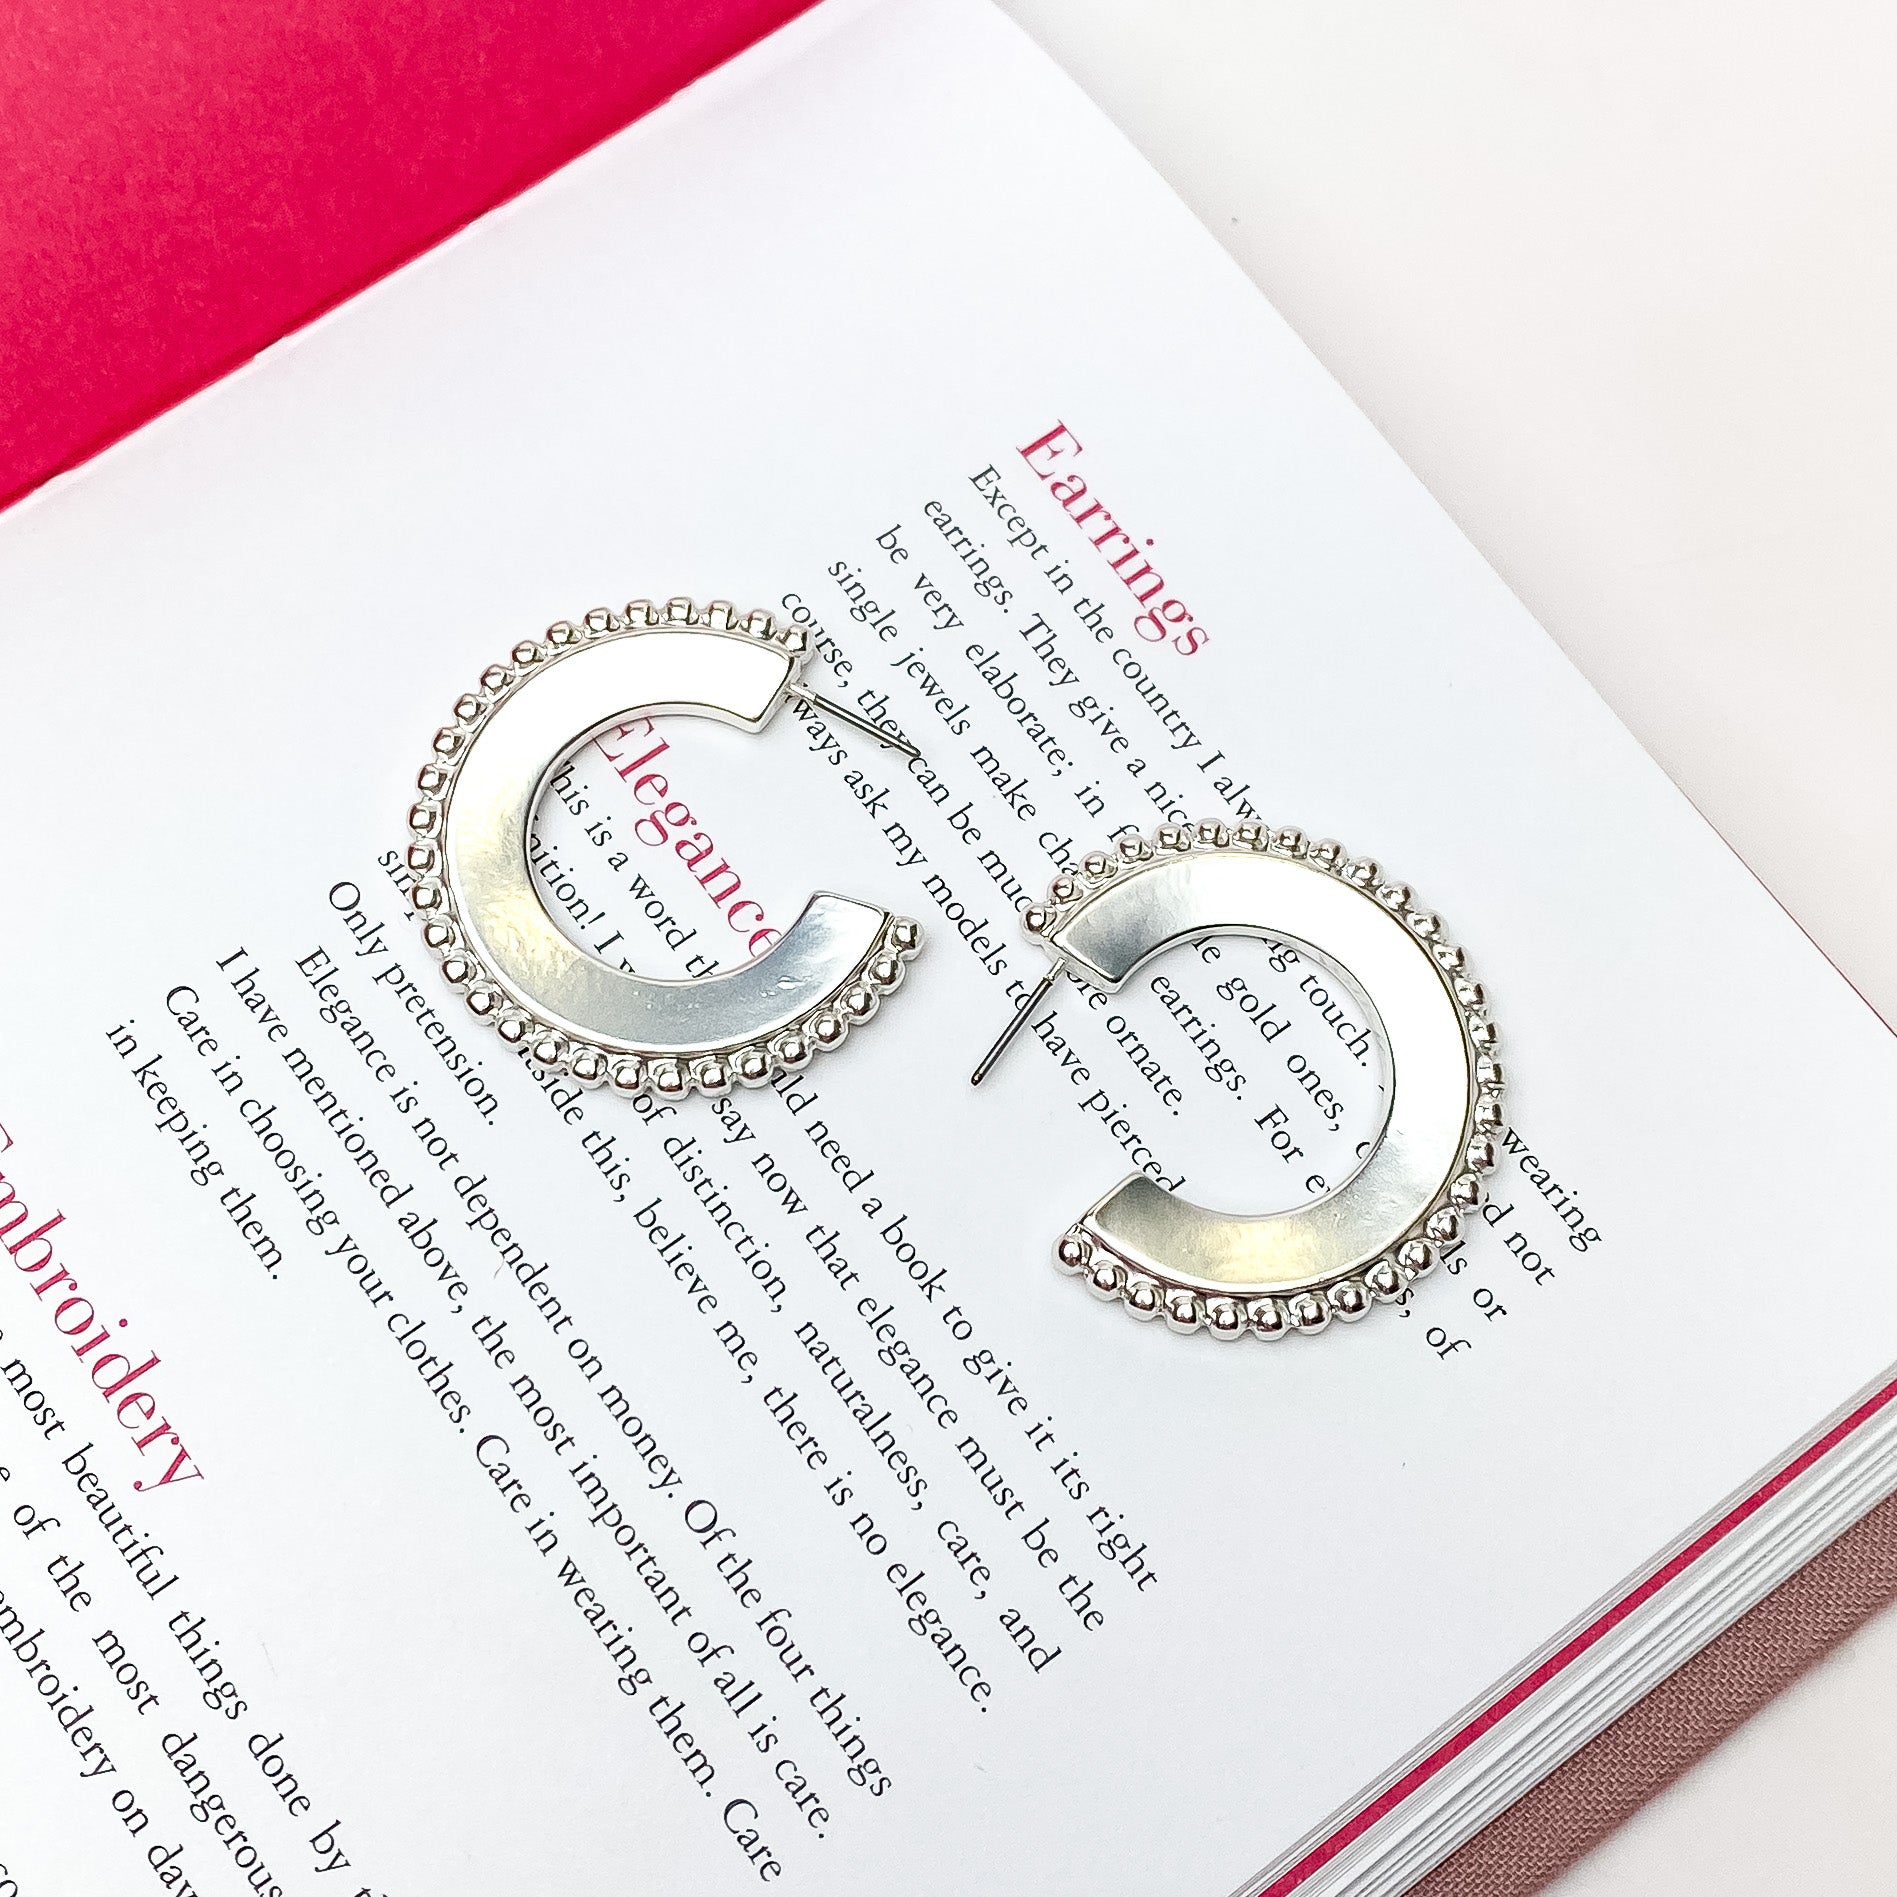 Smooth, silver hoop earrings with a beaded edge. These earrings are pictured on an open book on a white background. 